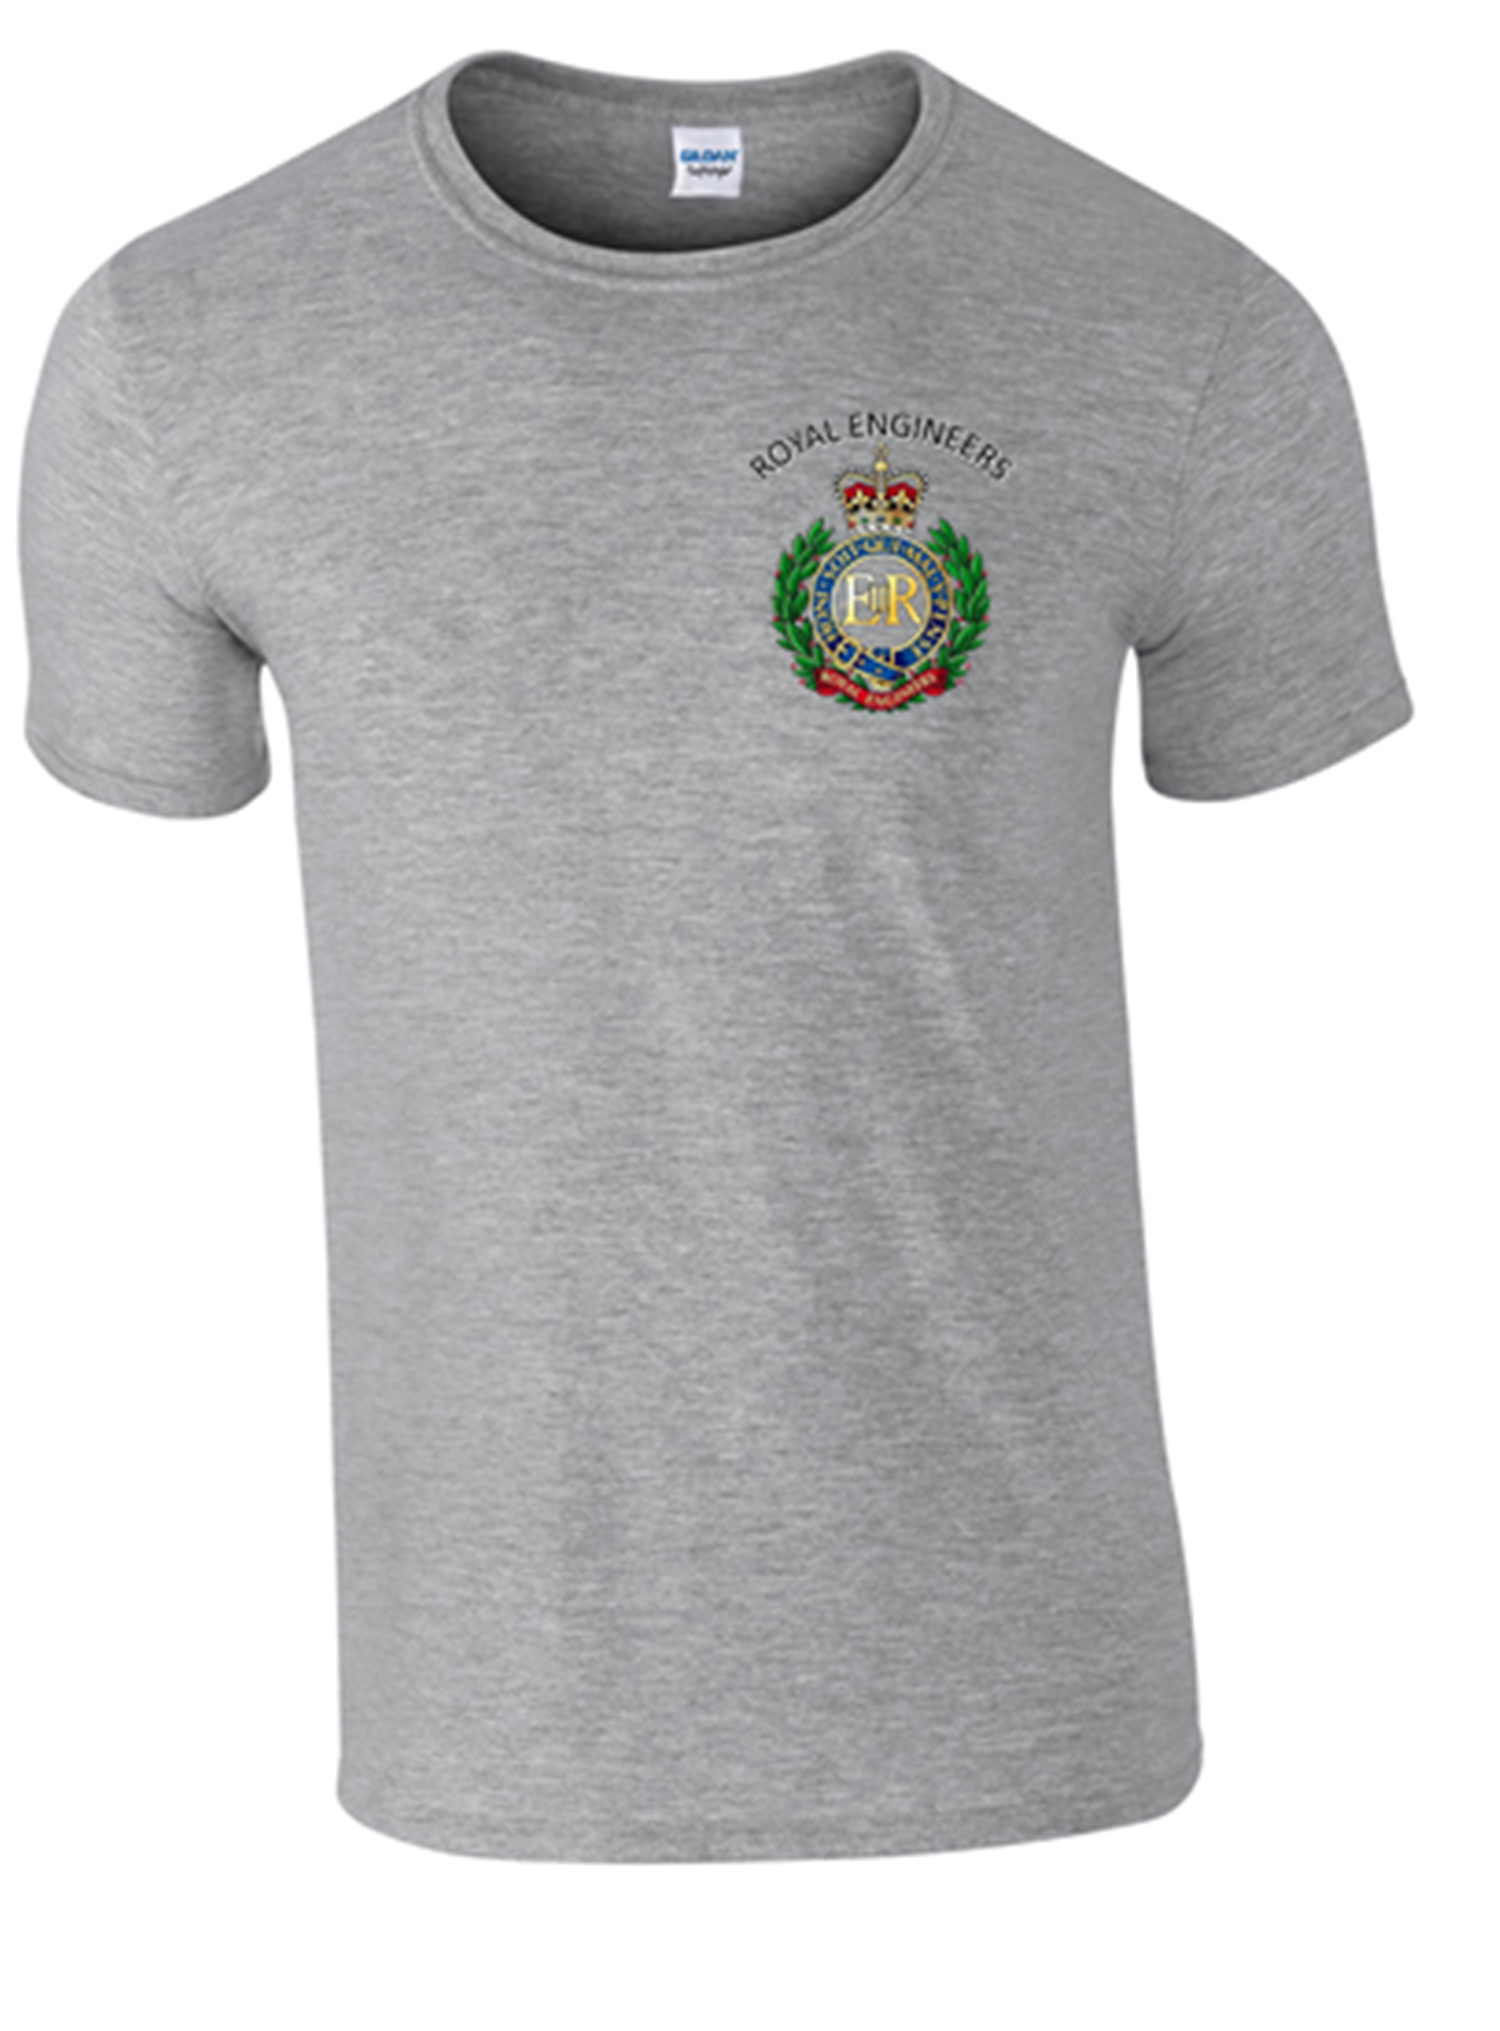 Royal Engineers T-Shirt Front Logo only Official MOD Approved Merchandise - Army 1157 kit Grey / L Army 1157 Kit Veterans Owned Business